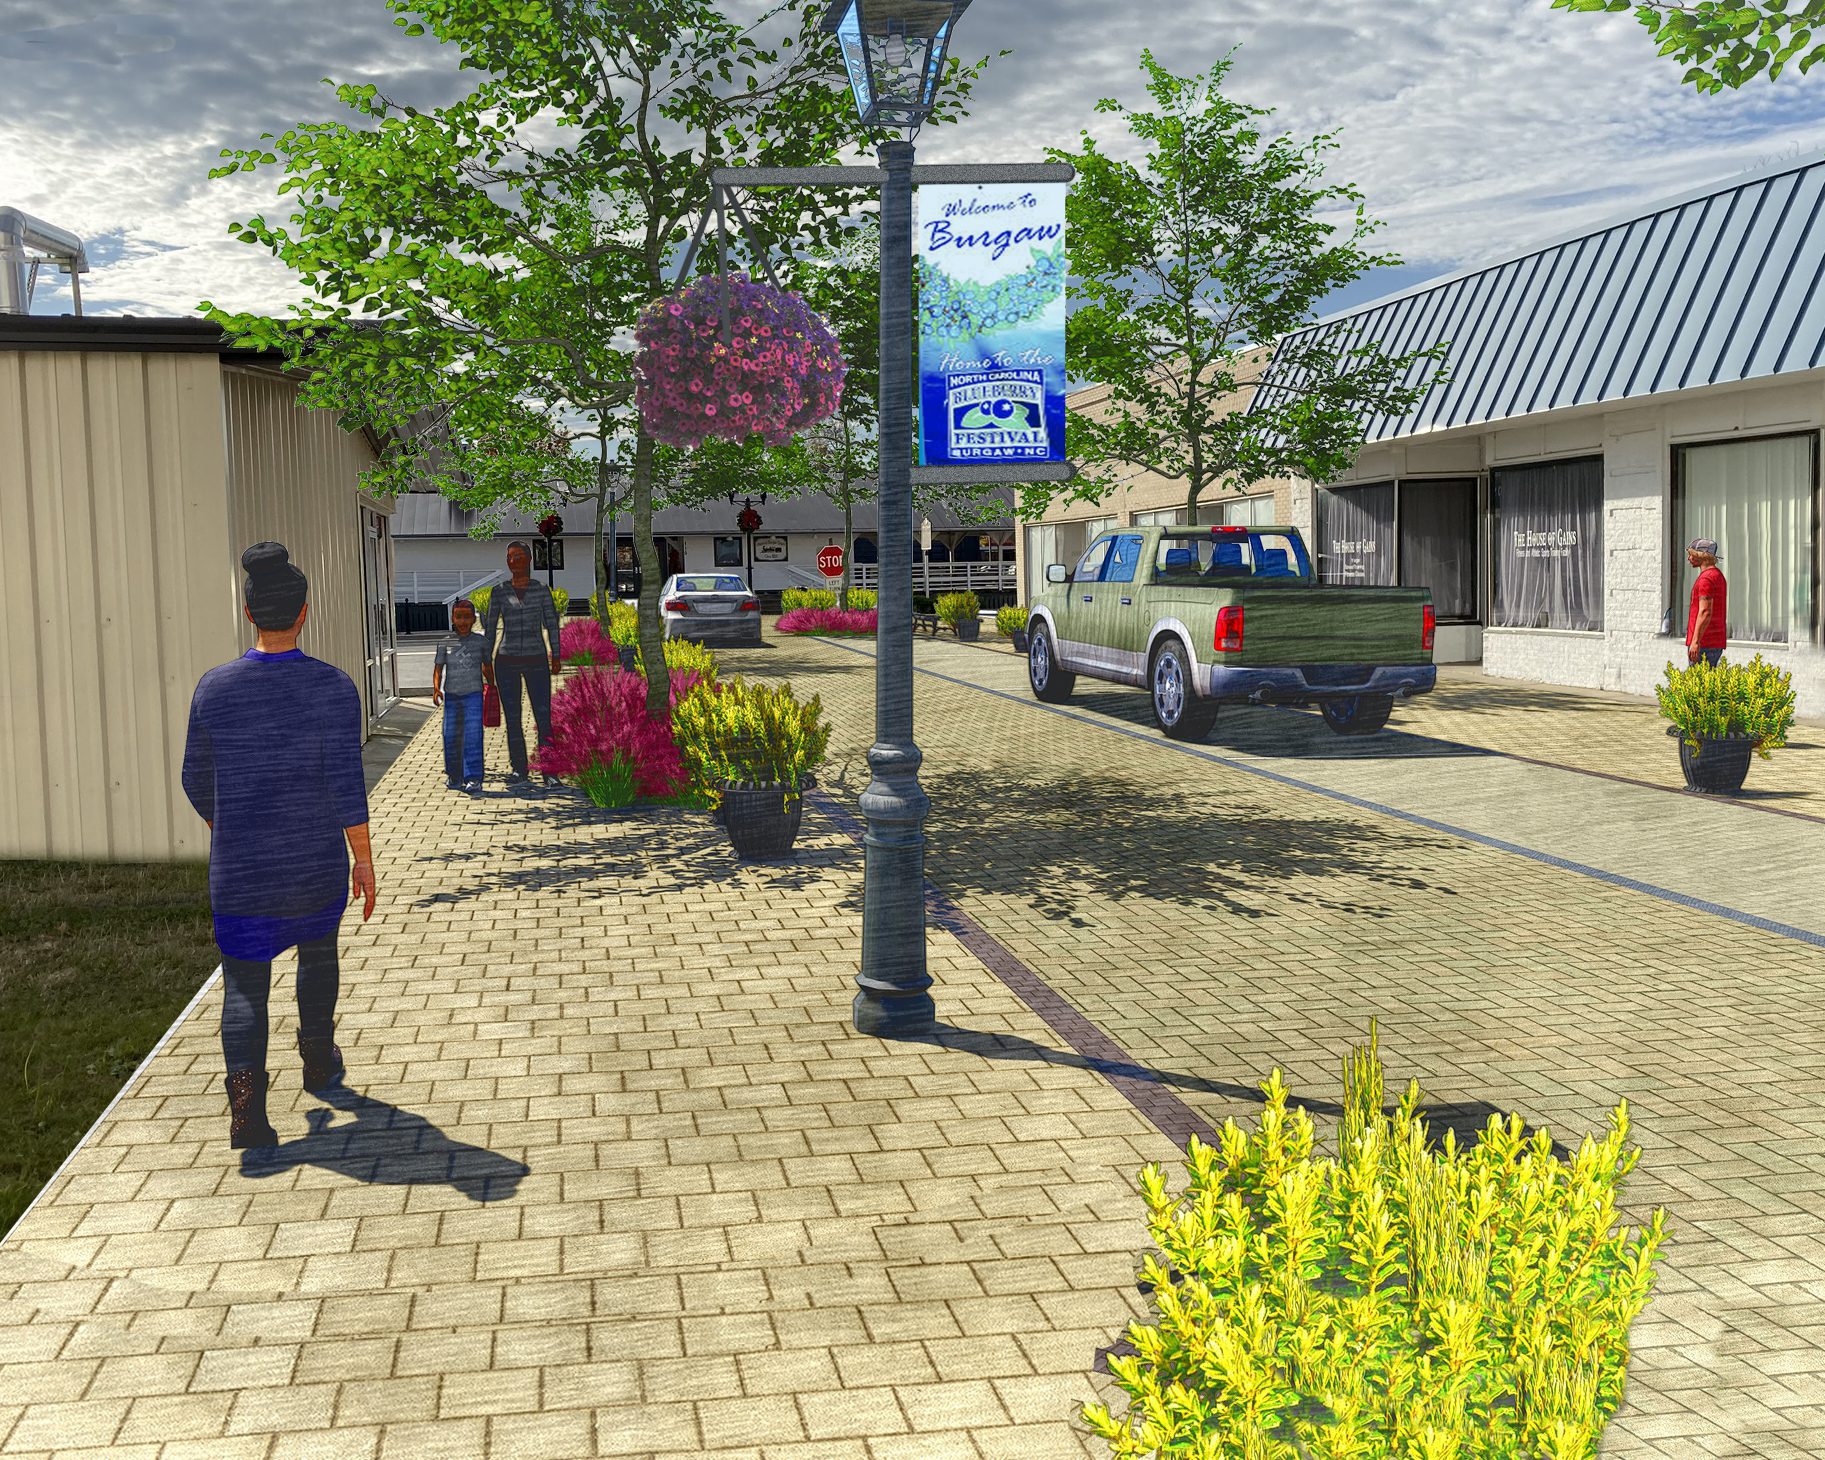 A rendering of the proposed paver sidewalks and street trees on Courthouse Avenue